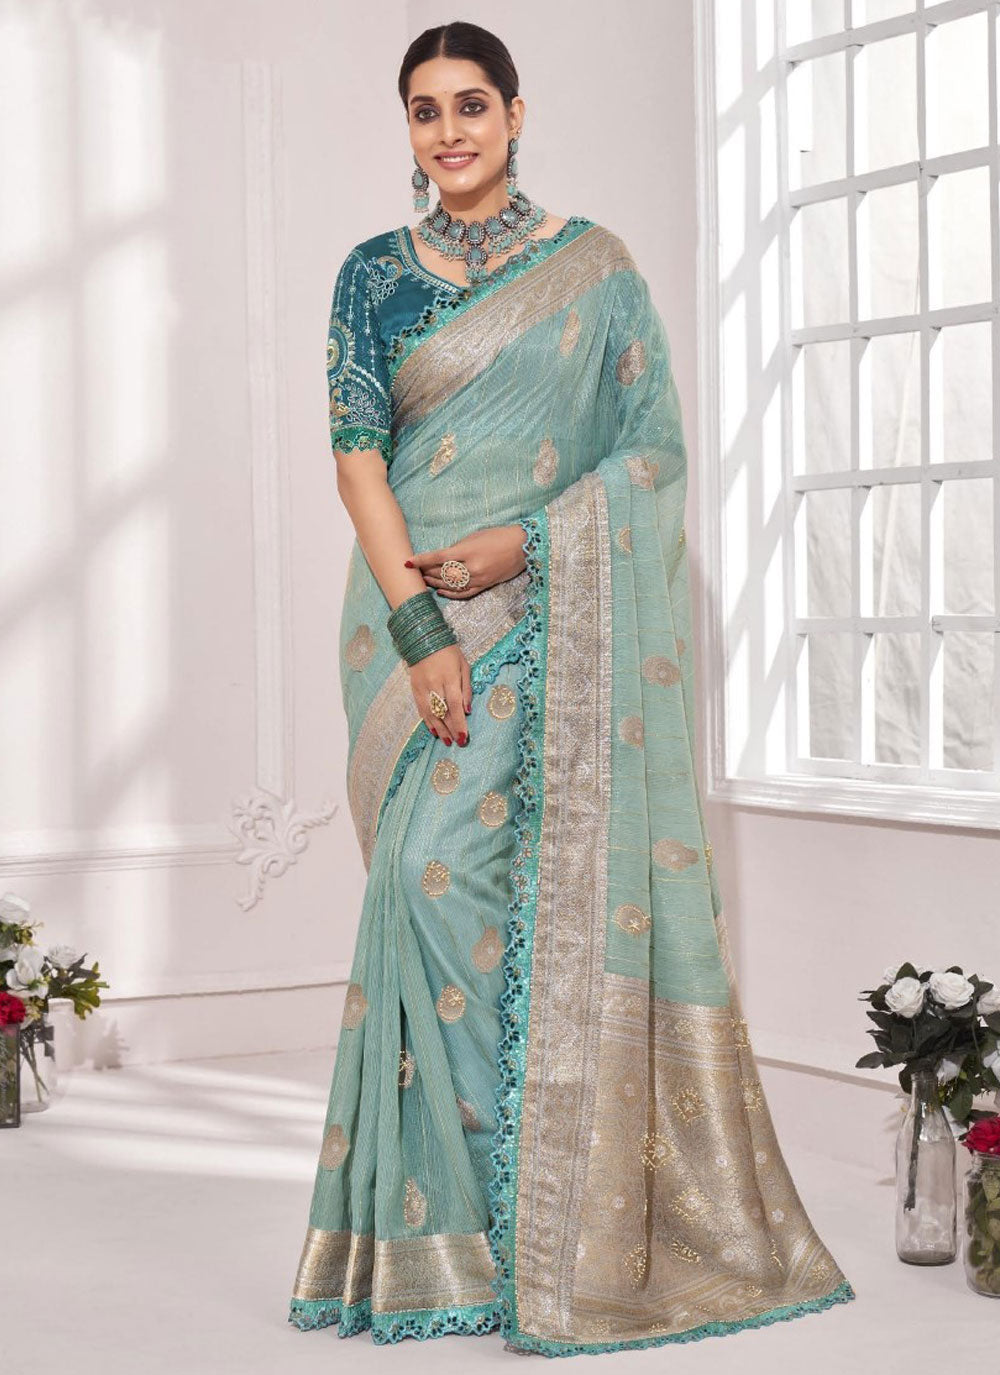 Teal Designer Sari With Embroidered And Weaving Work